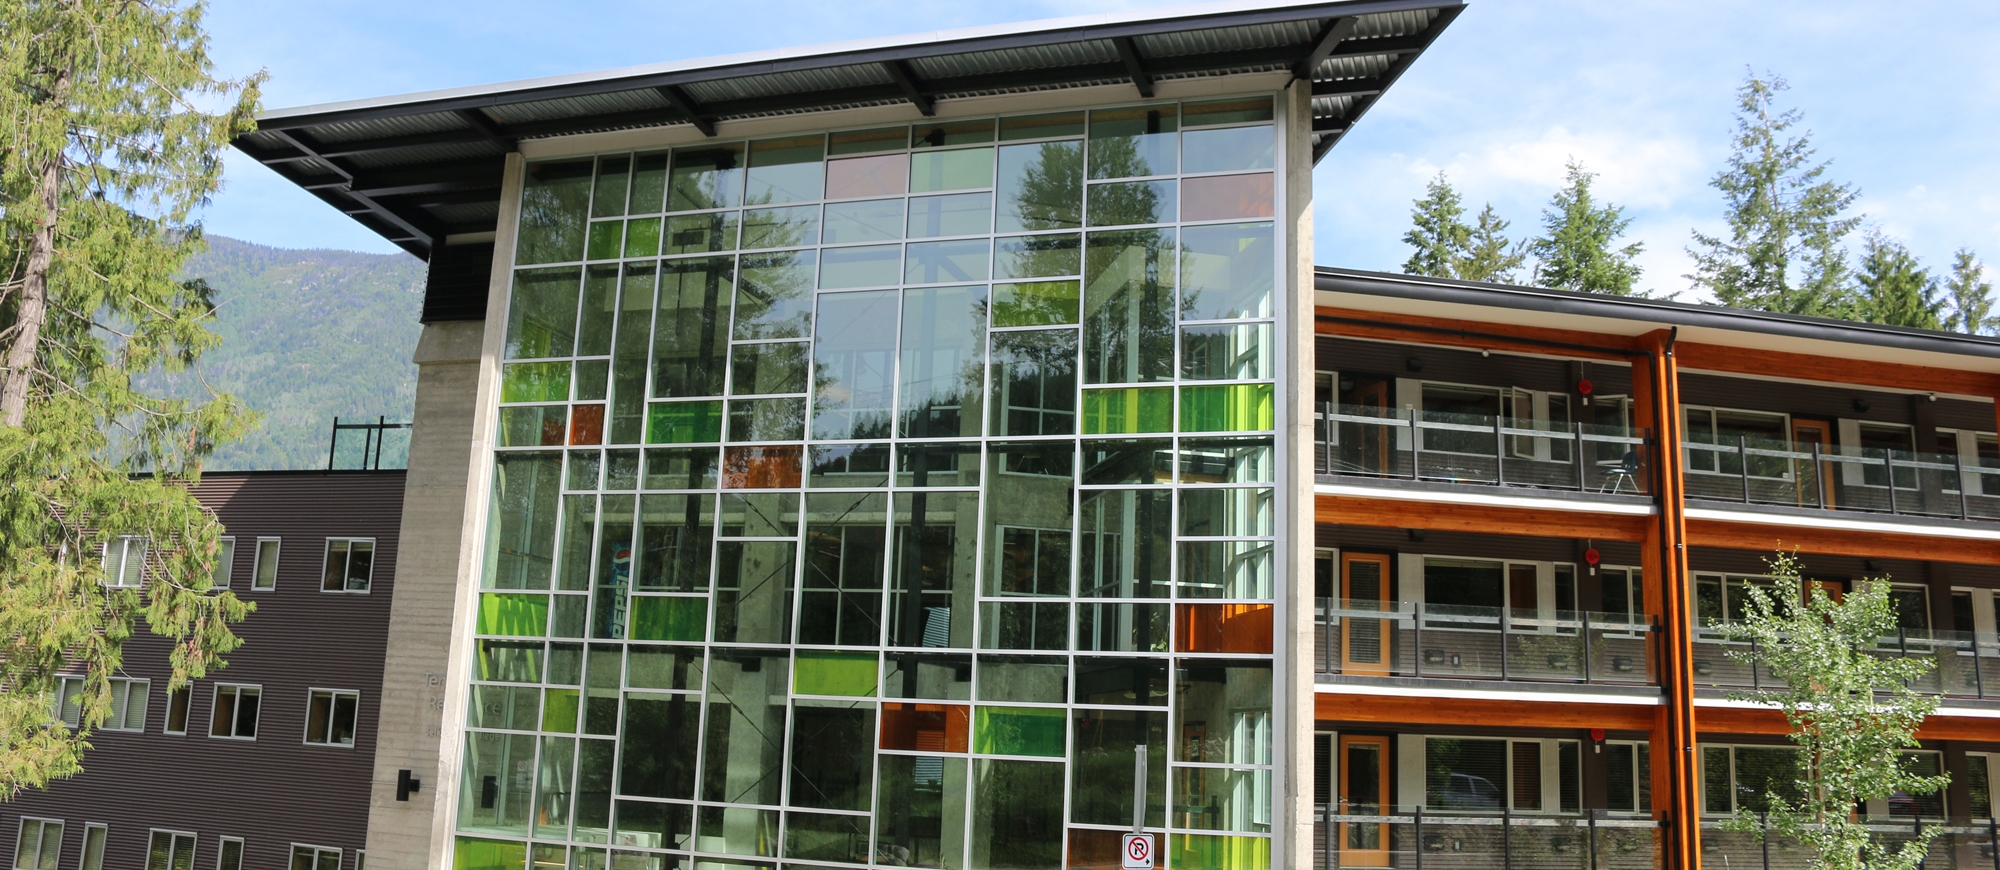 The Selkirk College Tenth Street Student Housing building in Nelson, BC